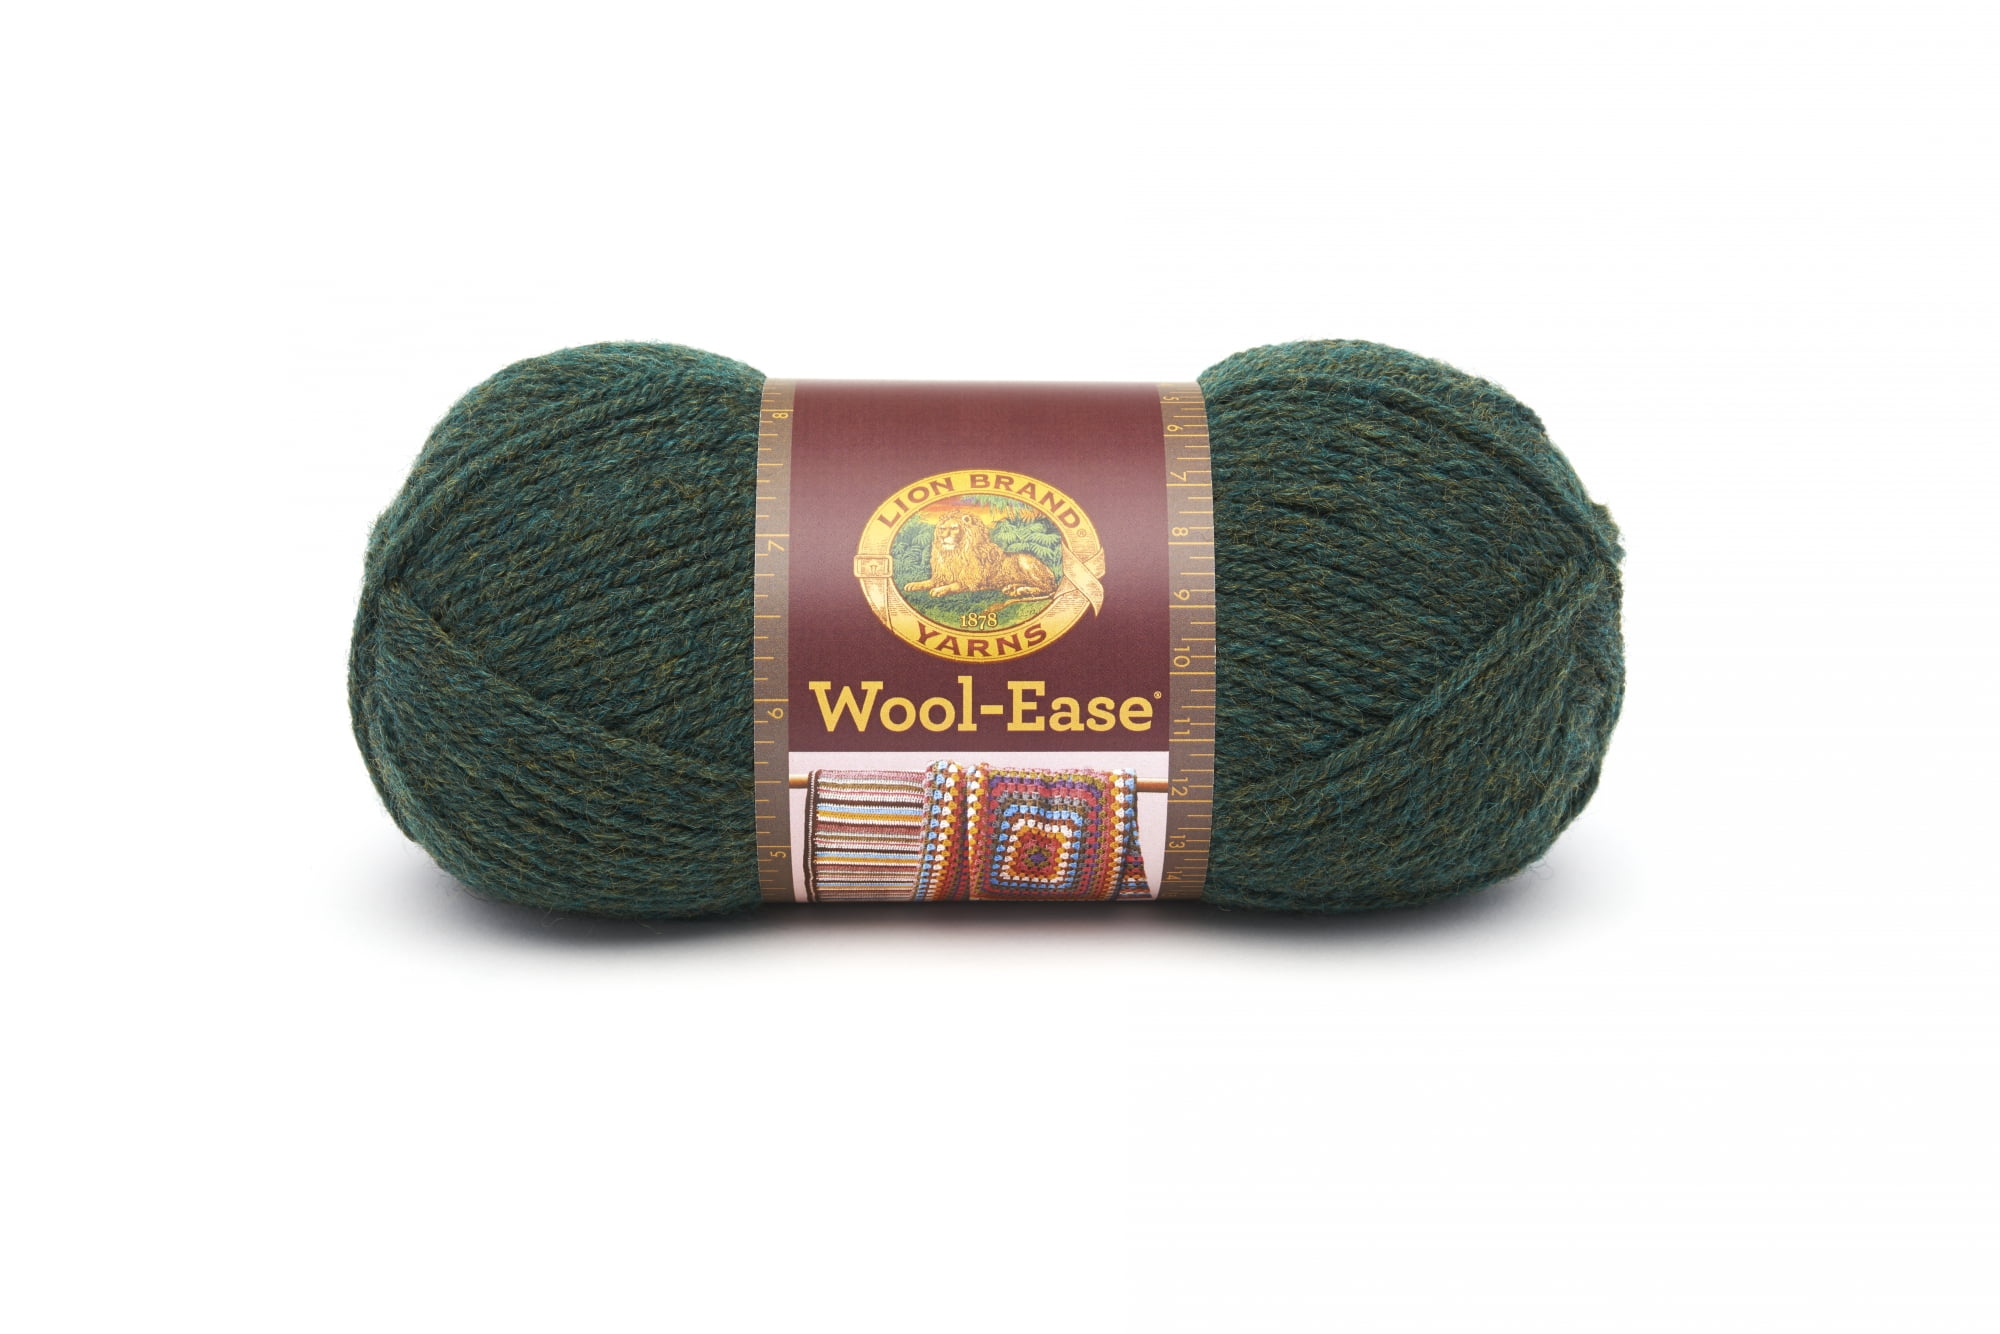 Lion Brand Yarn Wool Ease Forest Green Heather 620-180 Classic